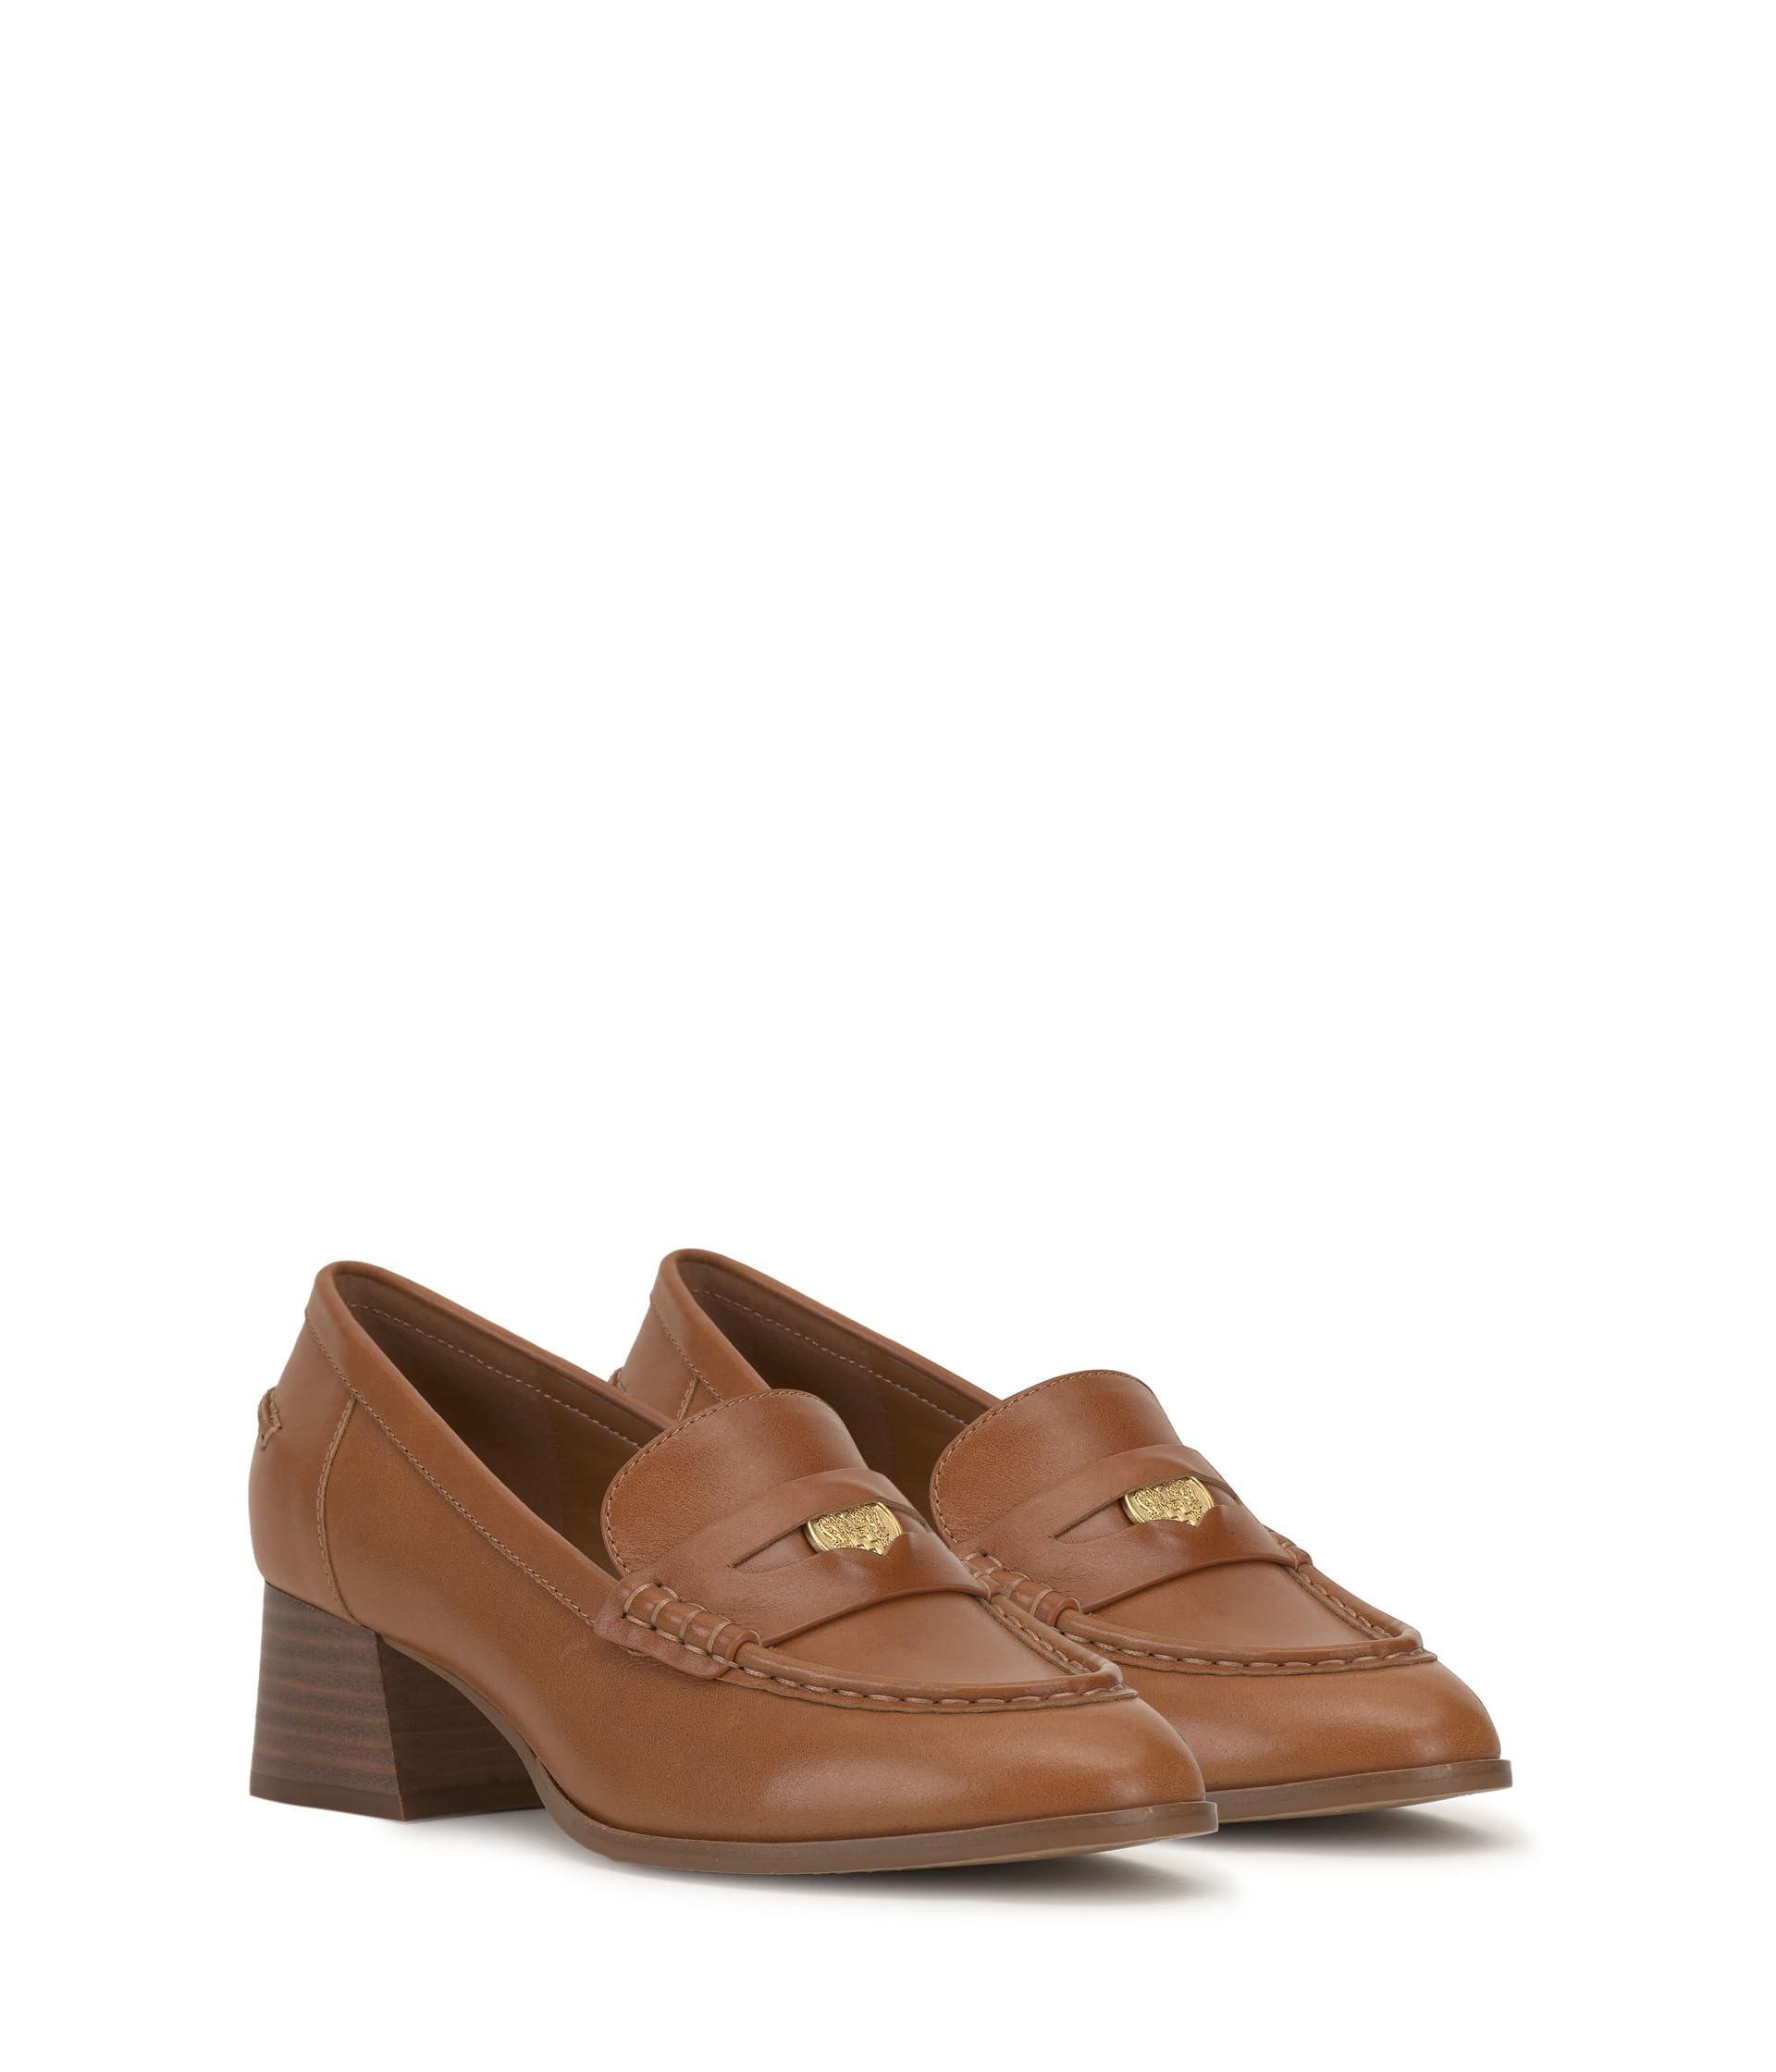 Vince Camuto Carissla in Brown | Lyst